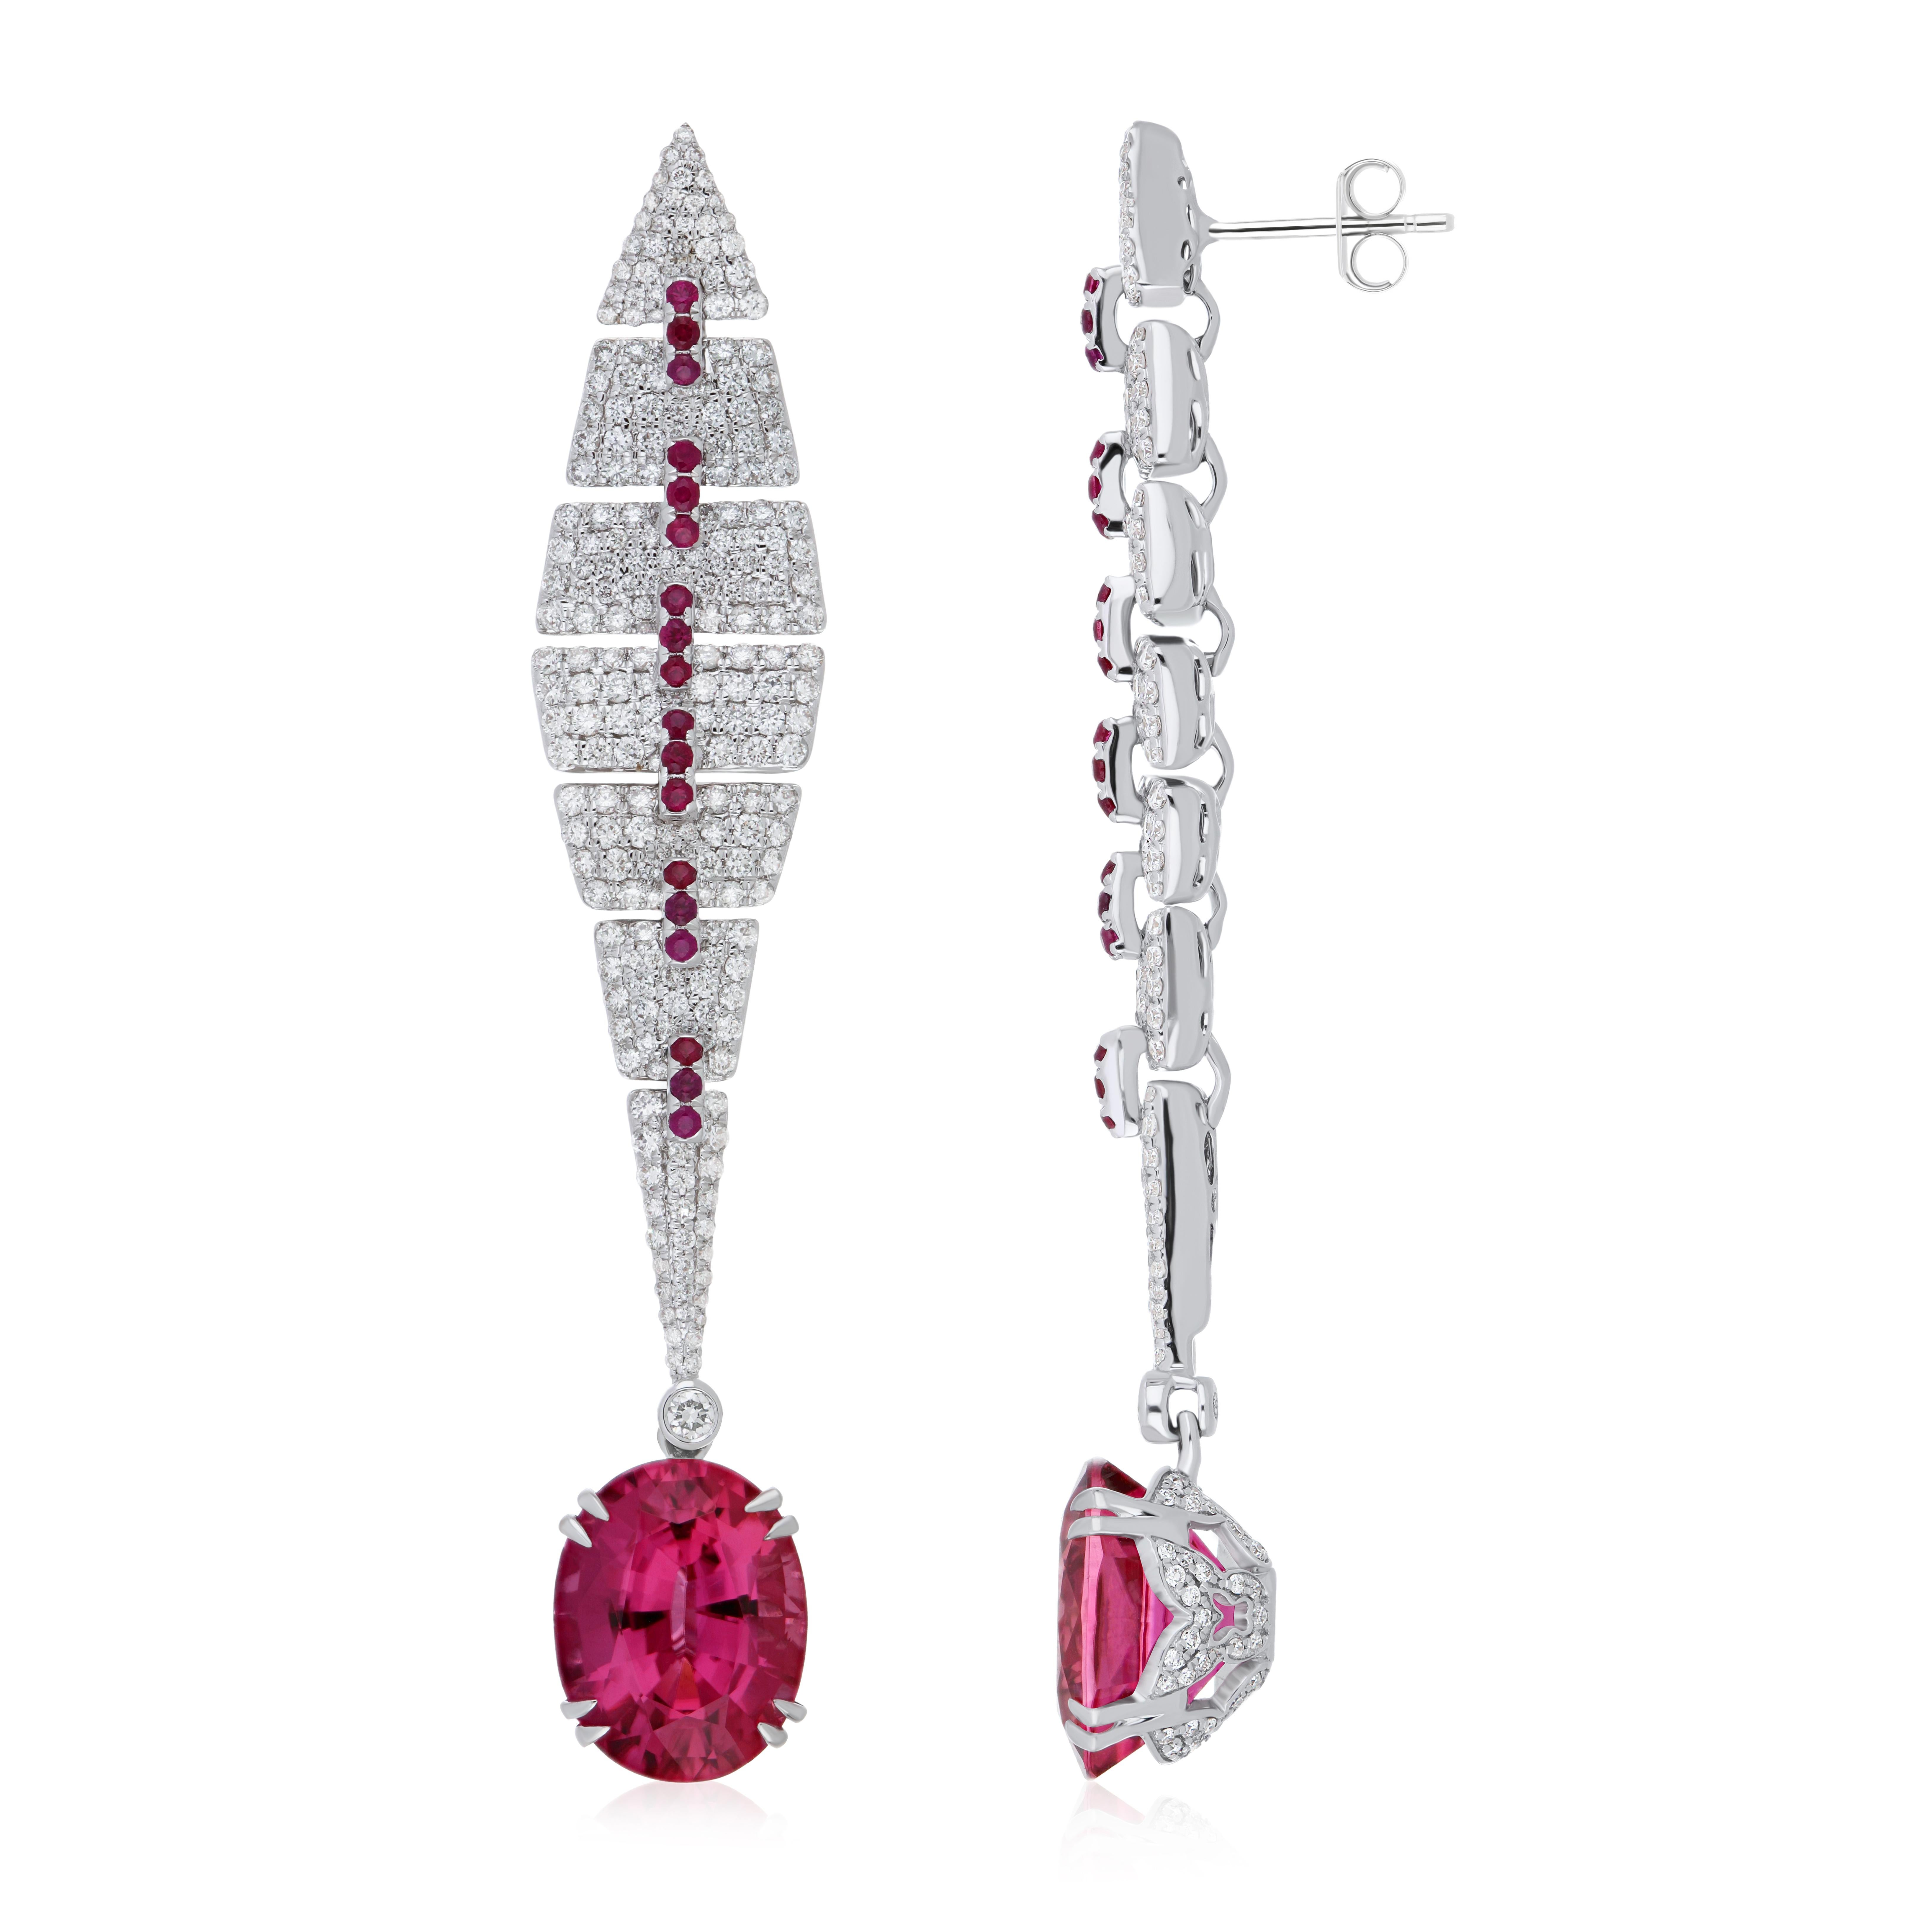 Elegant and Exquisitely detailed Gold Earring with 8.9 Cts (approx.) Pear shape Rubellite with Contrasting Ruby and accented with Micro pave set Diamonds, weighing approx.  2.45 CT's (approx.). total carat weight to further enhance the beauty of the